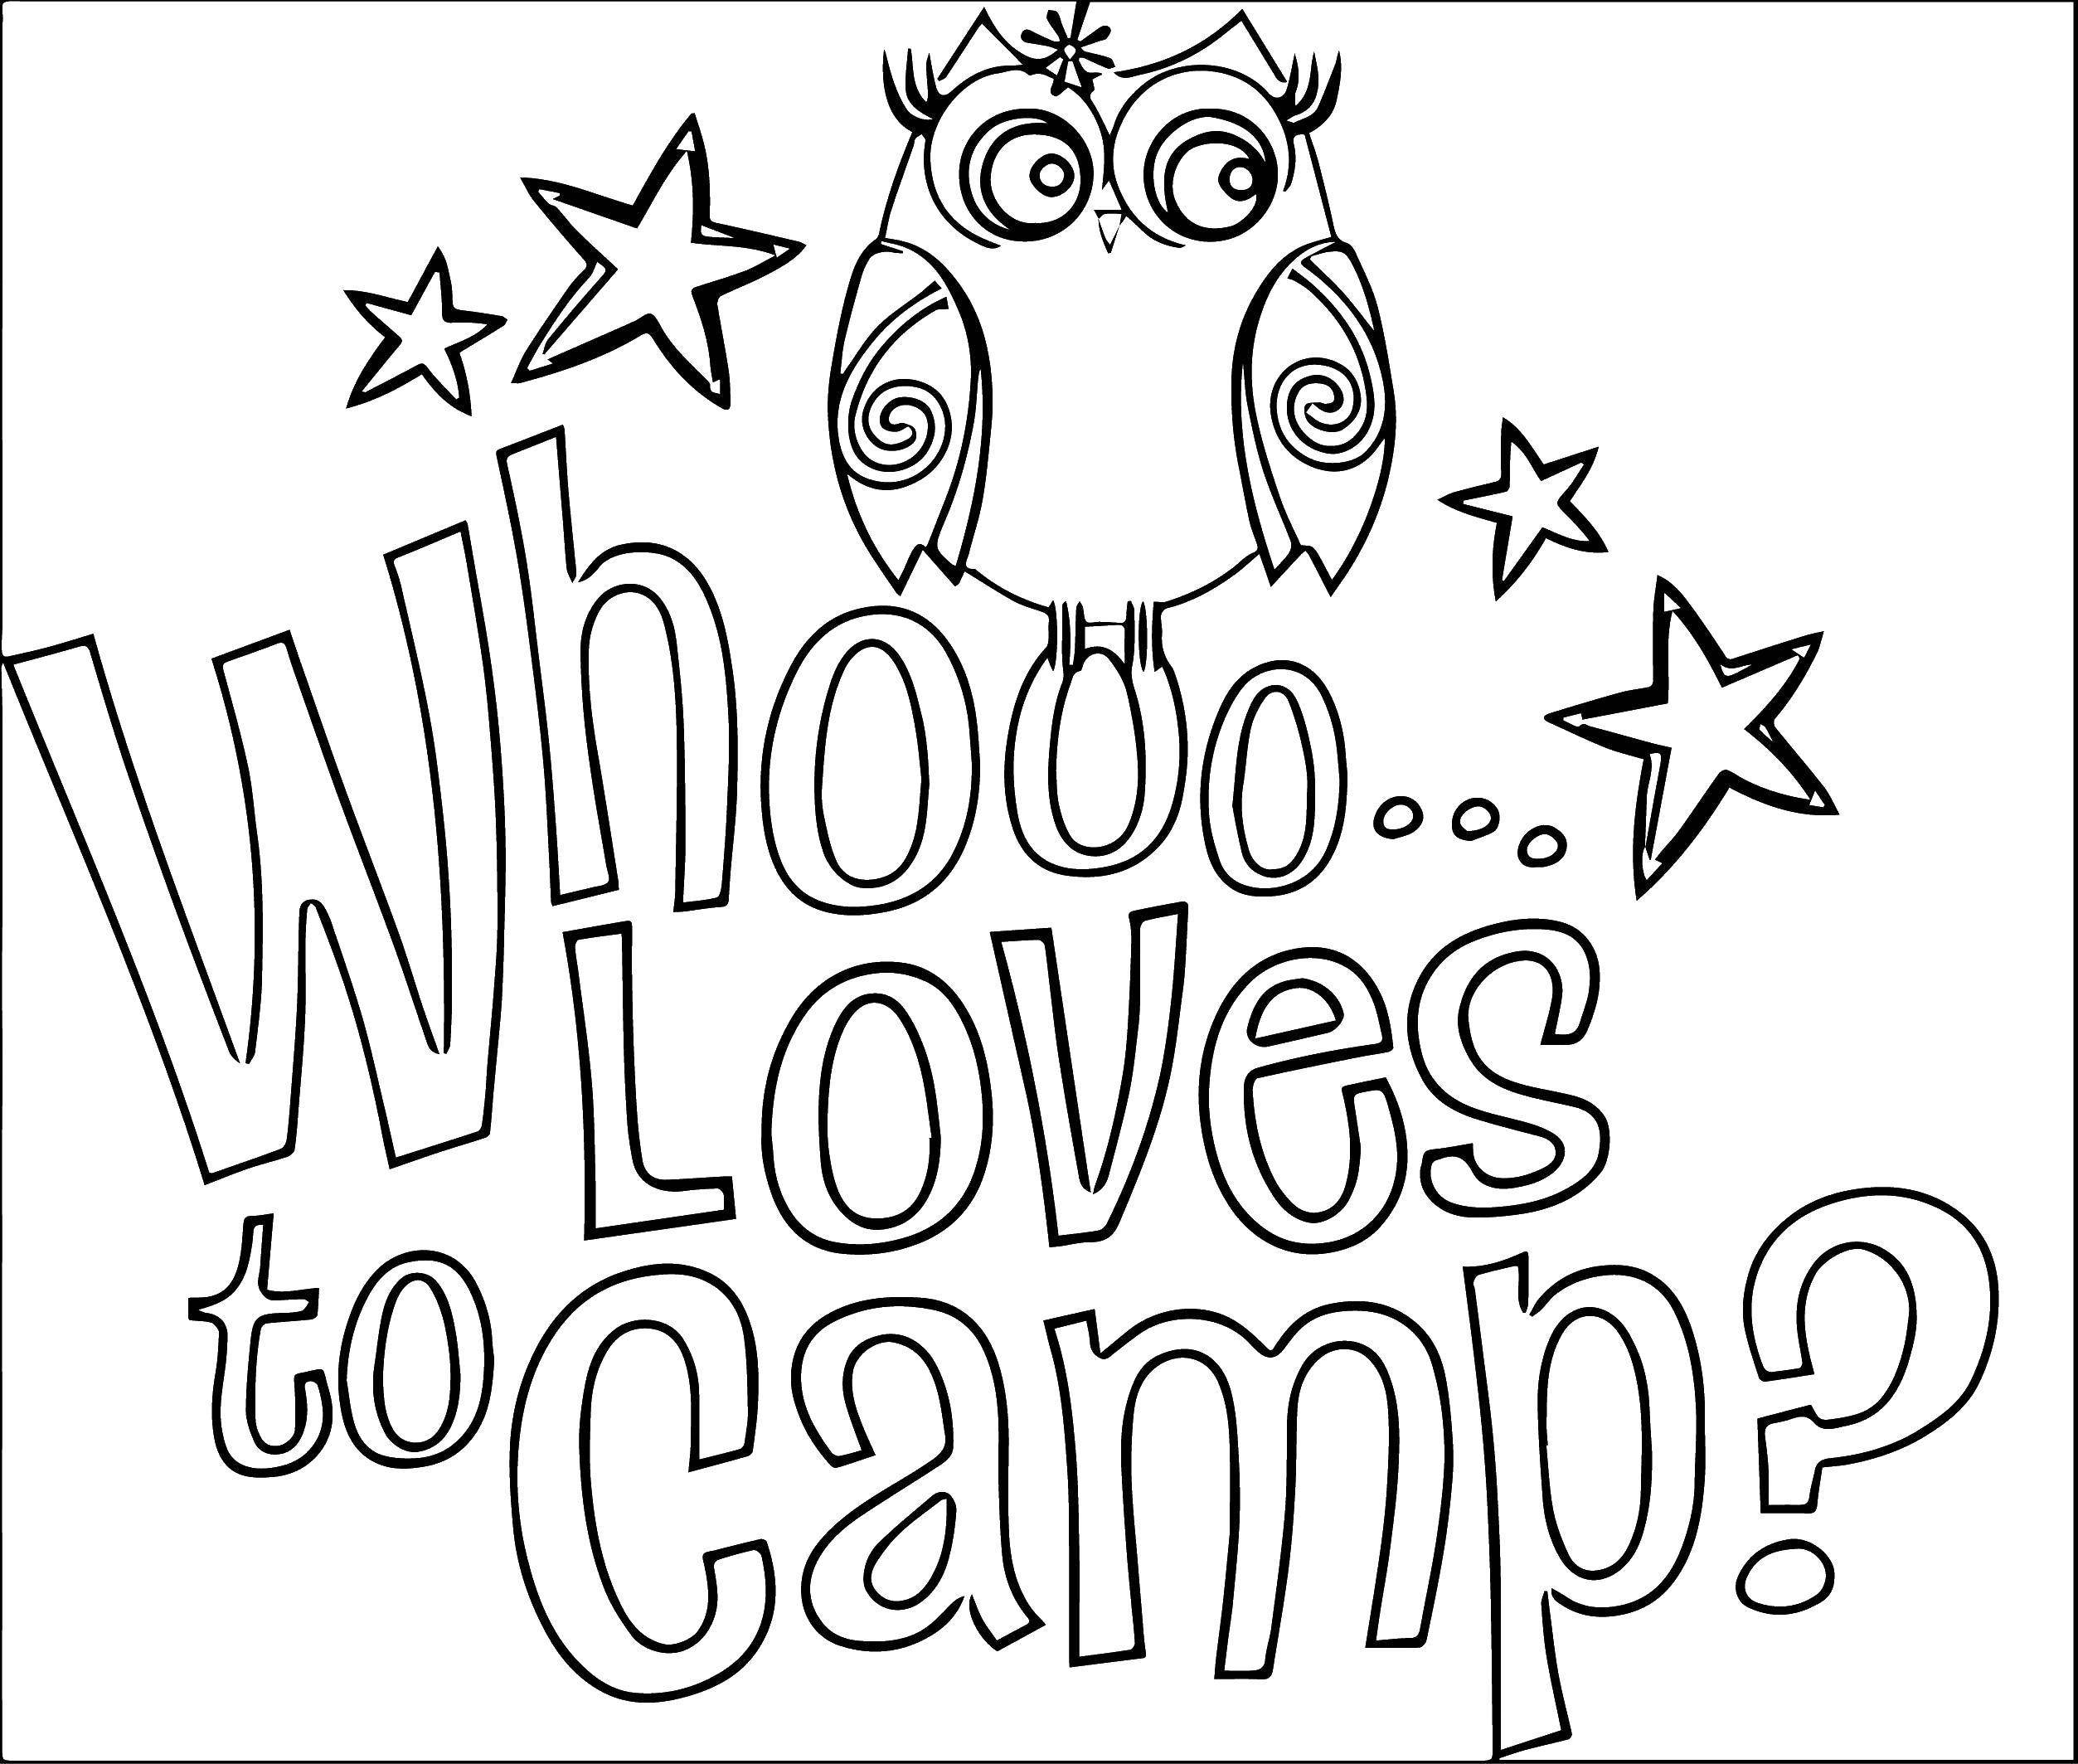 Coloring Owl and stars. Category birds. Tags:  birds, owl, stars.